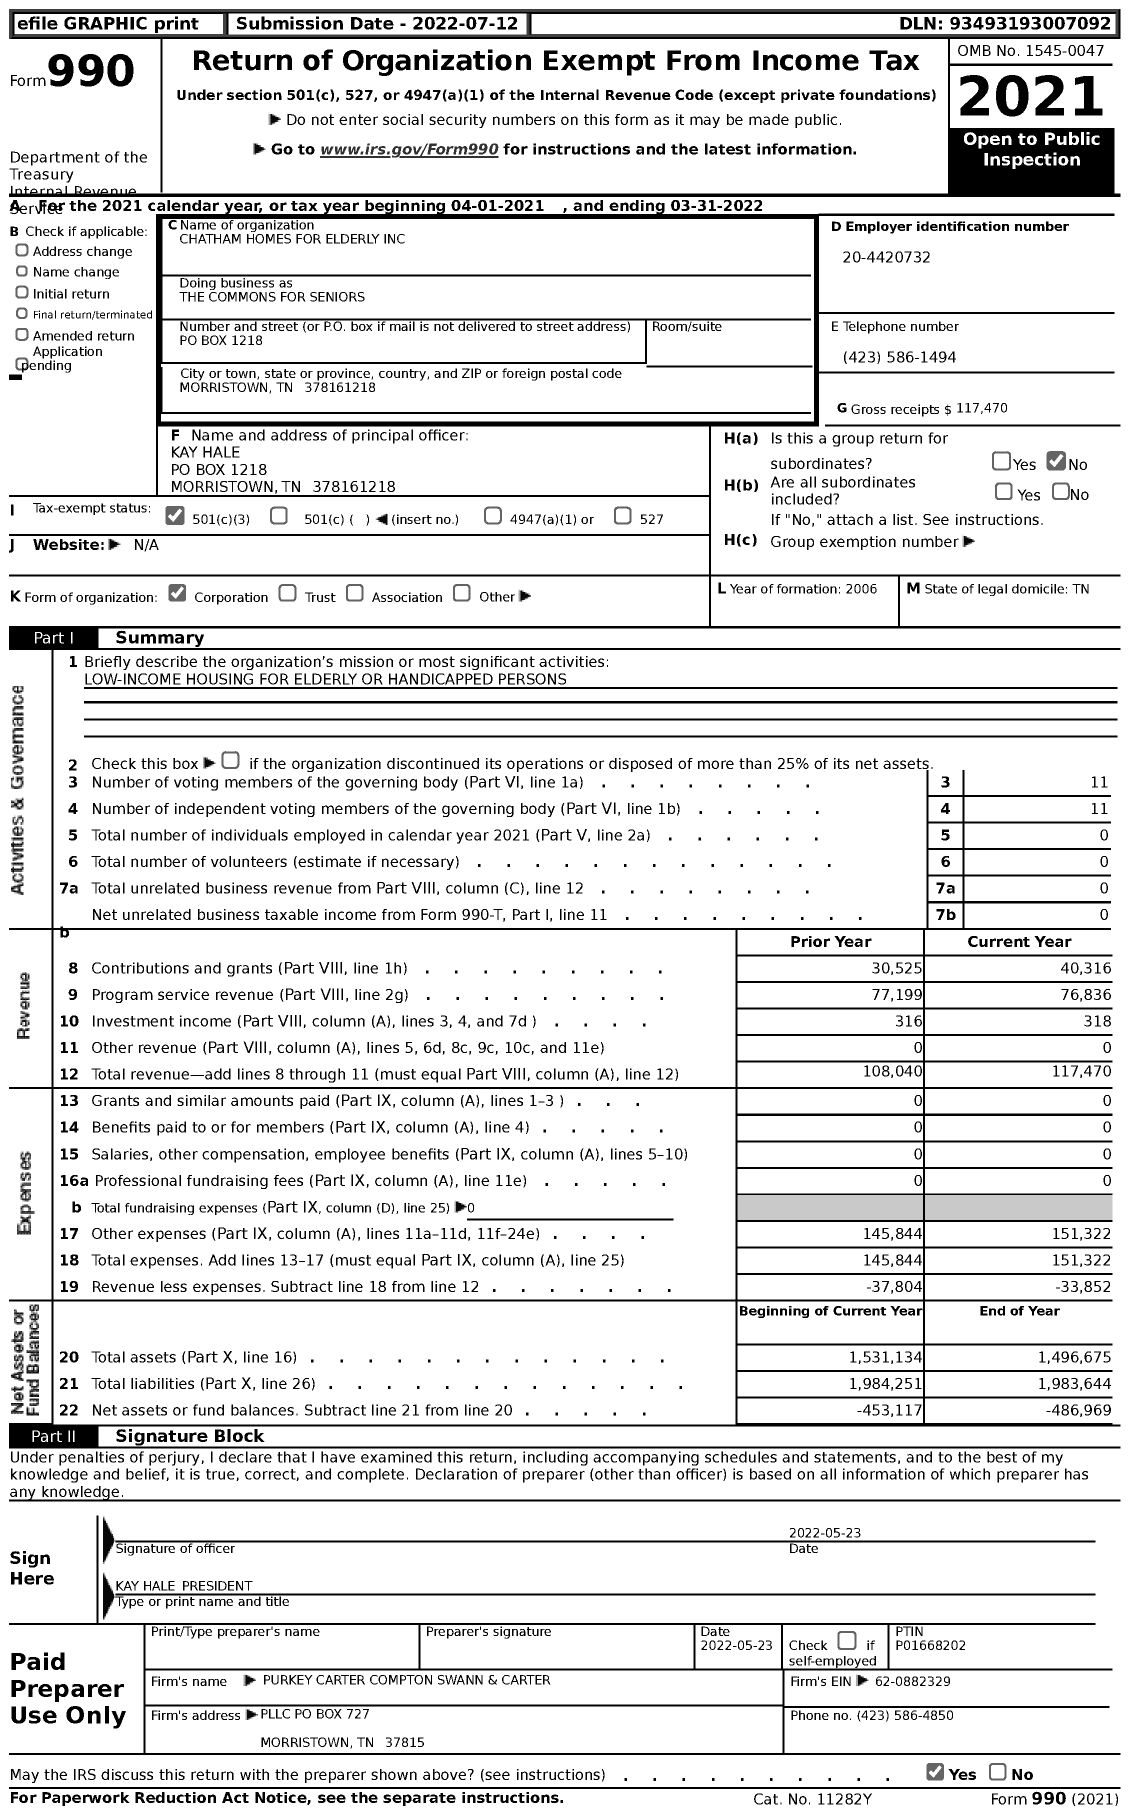 Image of first page of 2021 Form 990 for The Commons for Seniors